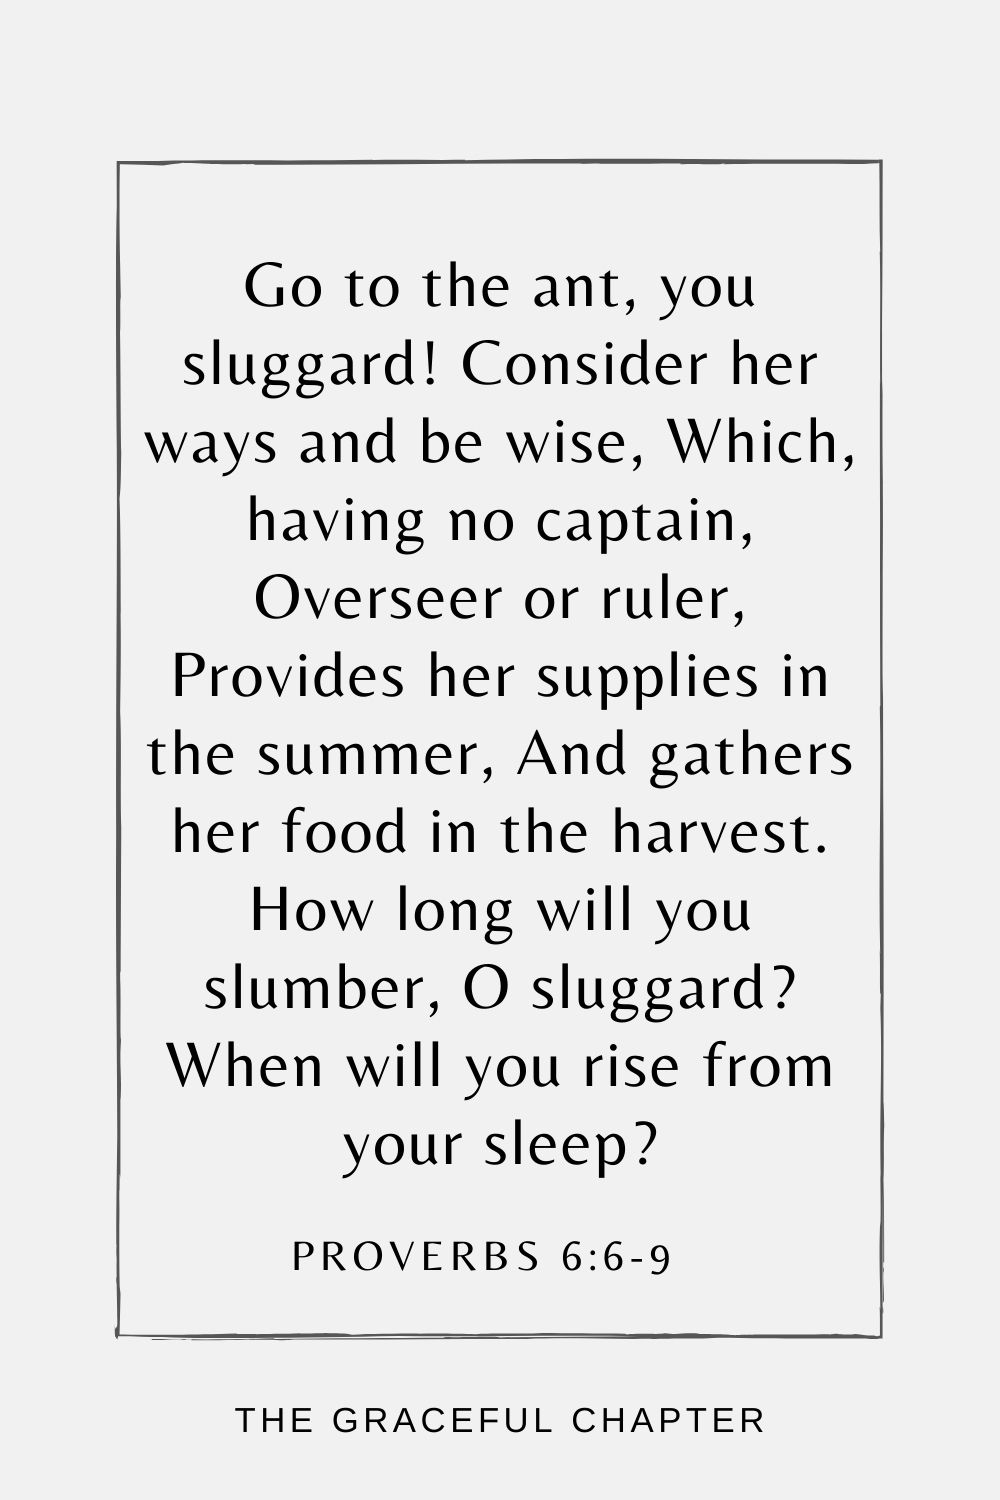 Go to the ant, you sluggard! Consider her ways and be wise, Which, having no captain, Overseer or ruler, Provides her supplies in the summer, And gathers her food in the harvest. How long will you slumber, O sluggard? When will you rise from your sleep? Proverbs 6:6-9